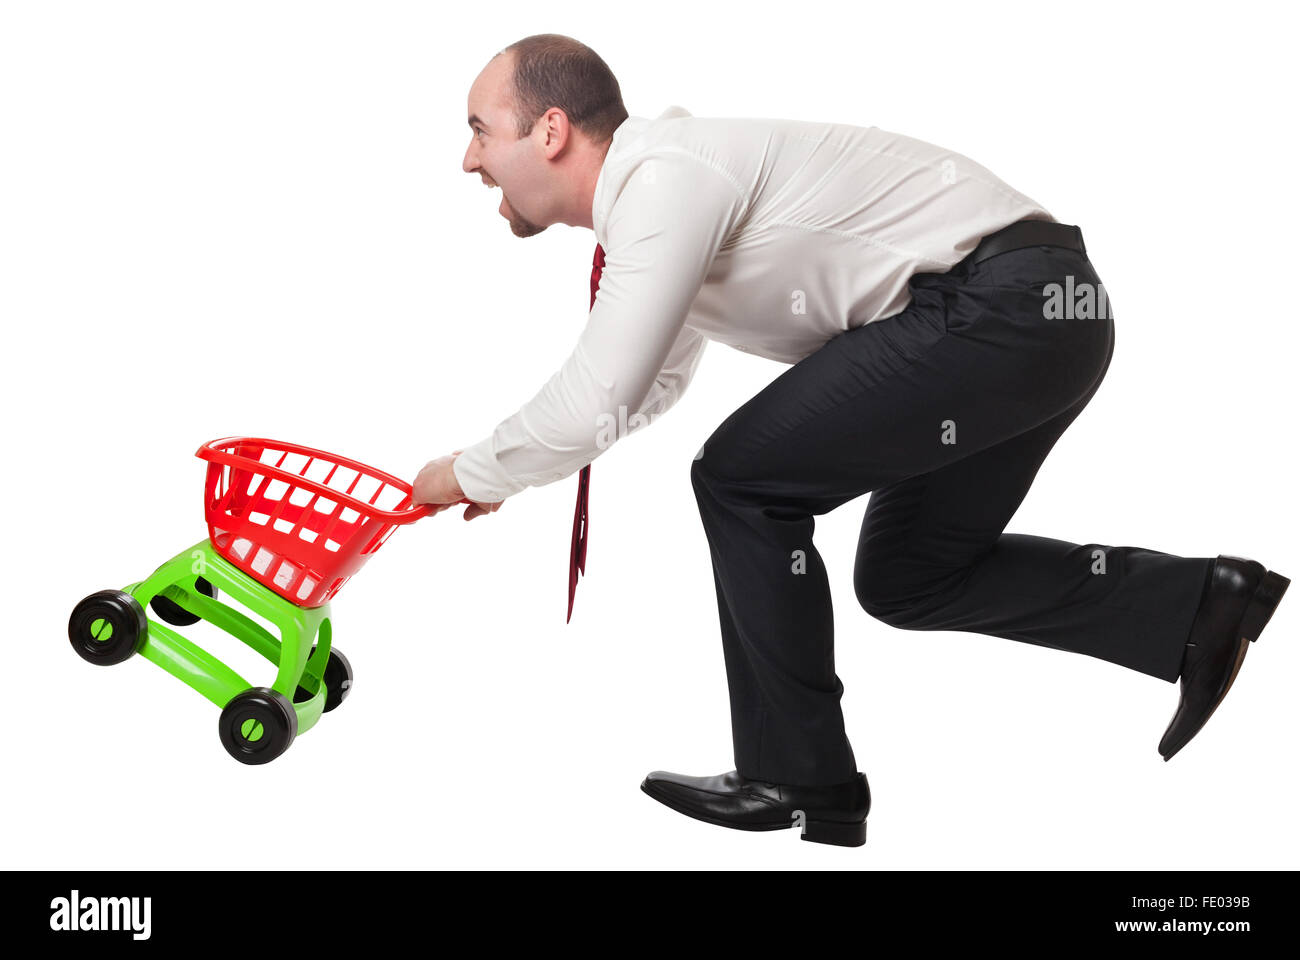 isolated man with toy shopping cart Stock Photo